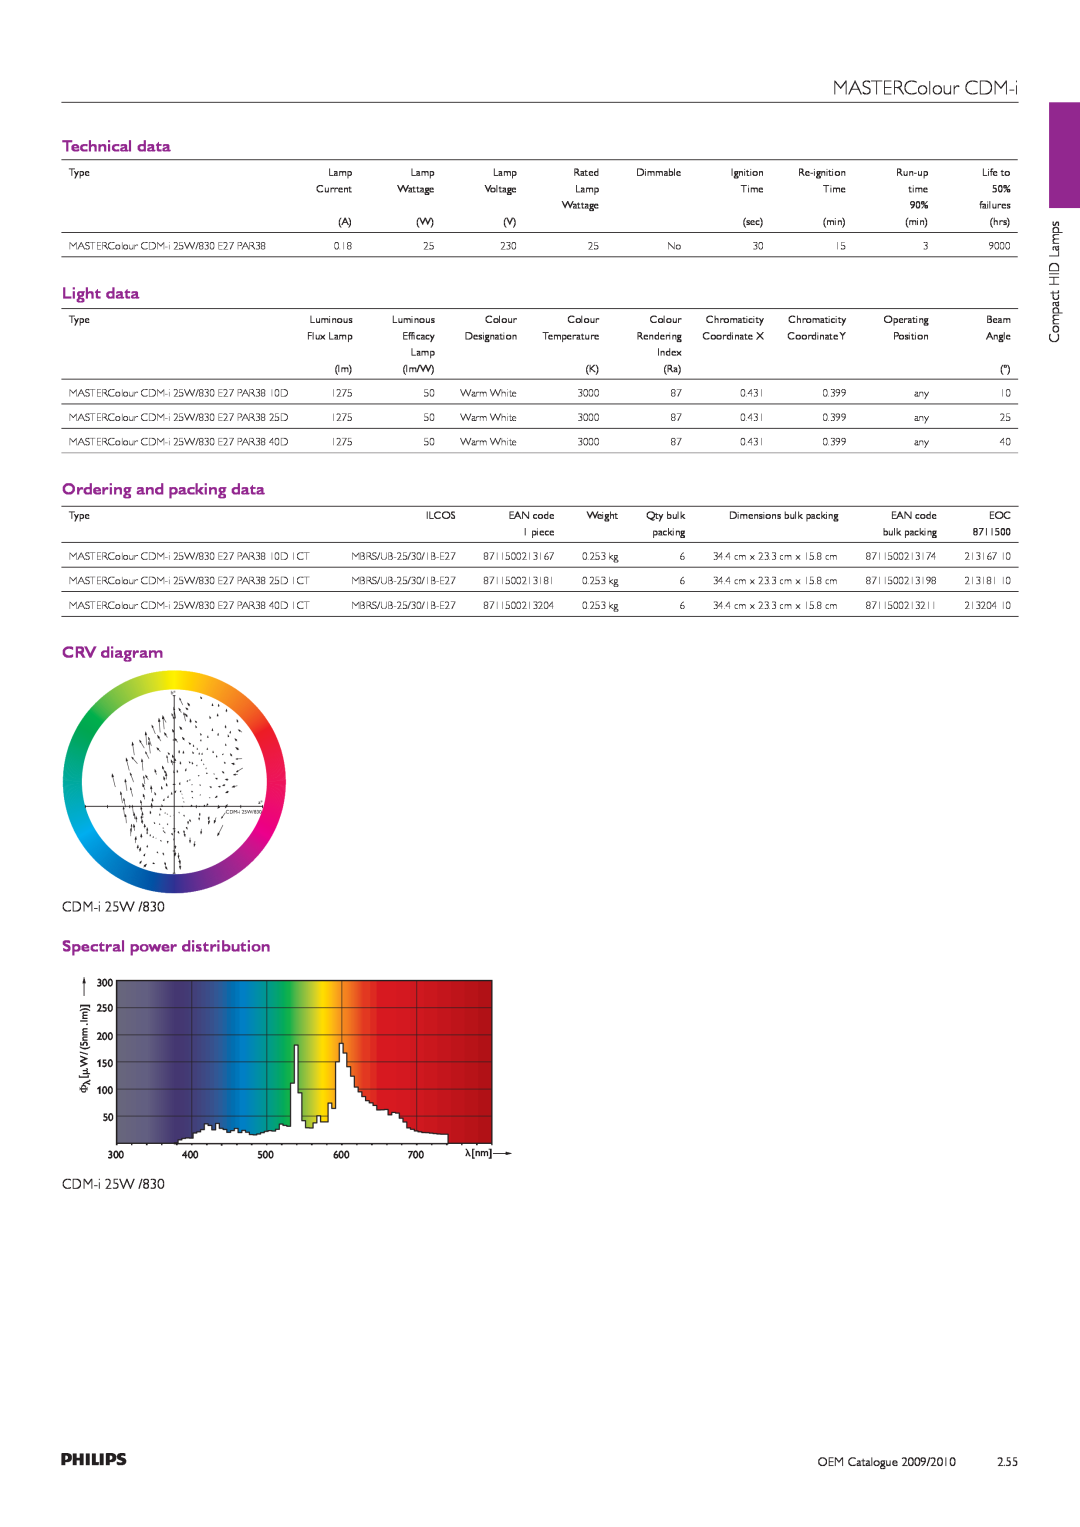 Philips Compact HID Lamp and Gear MASTERColour CDM-i, Technical data, Light data, Ordering and packing data, CRV diagram 